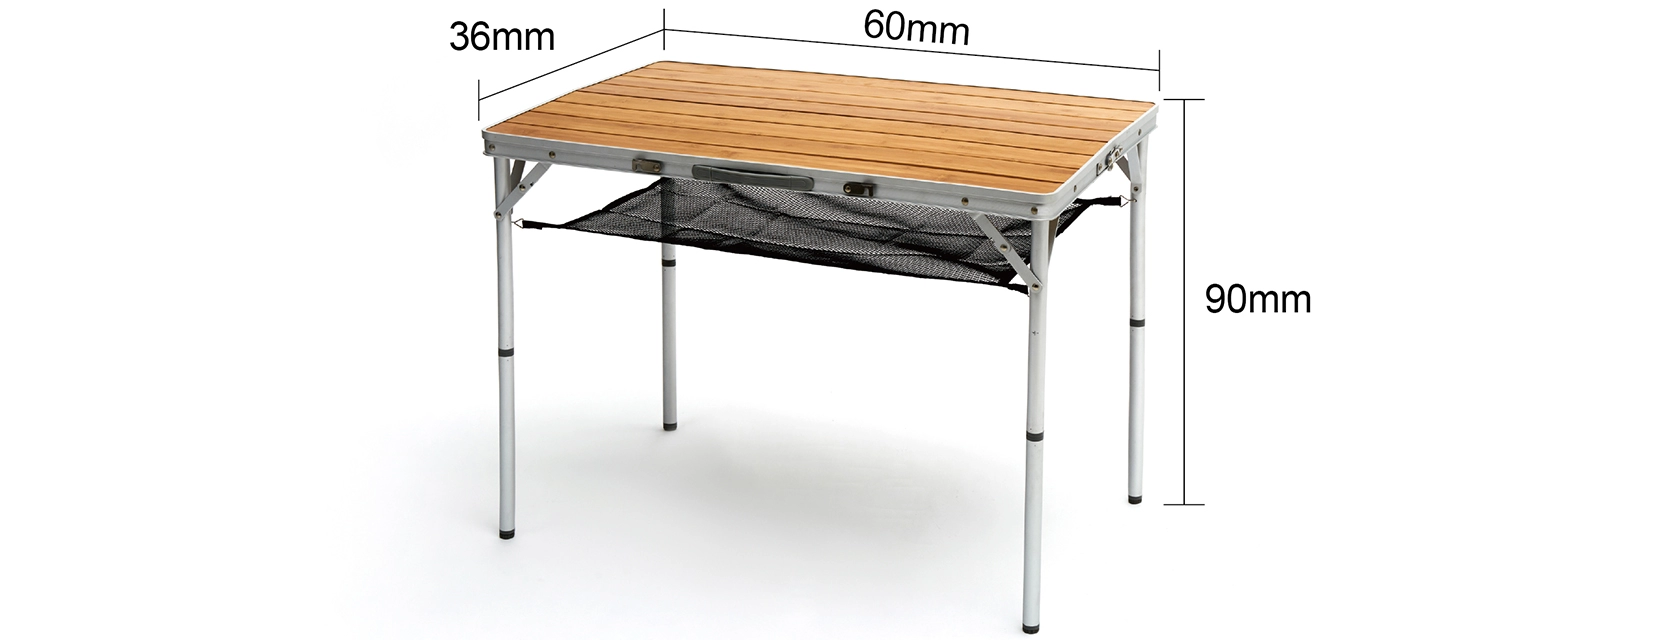 details of Bamboo Folding Table